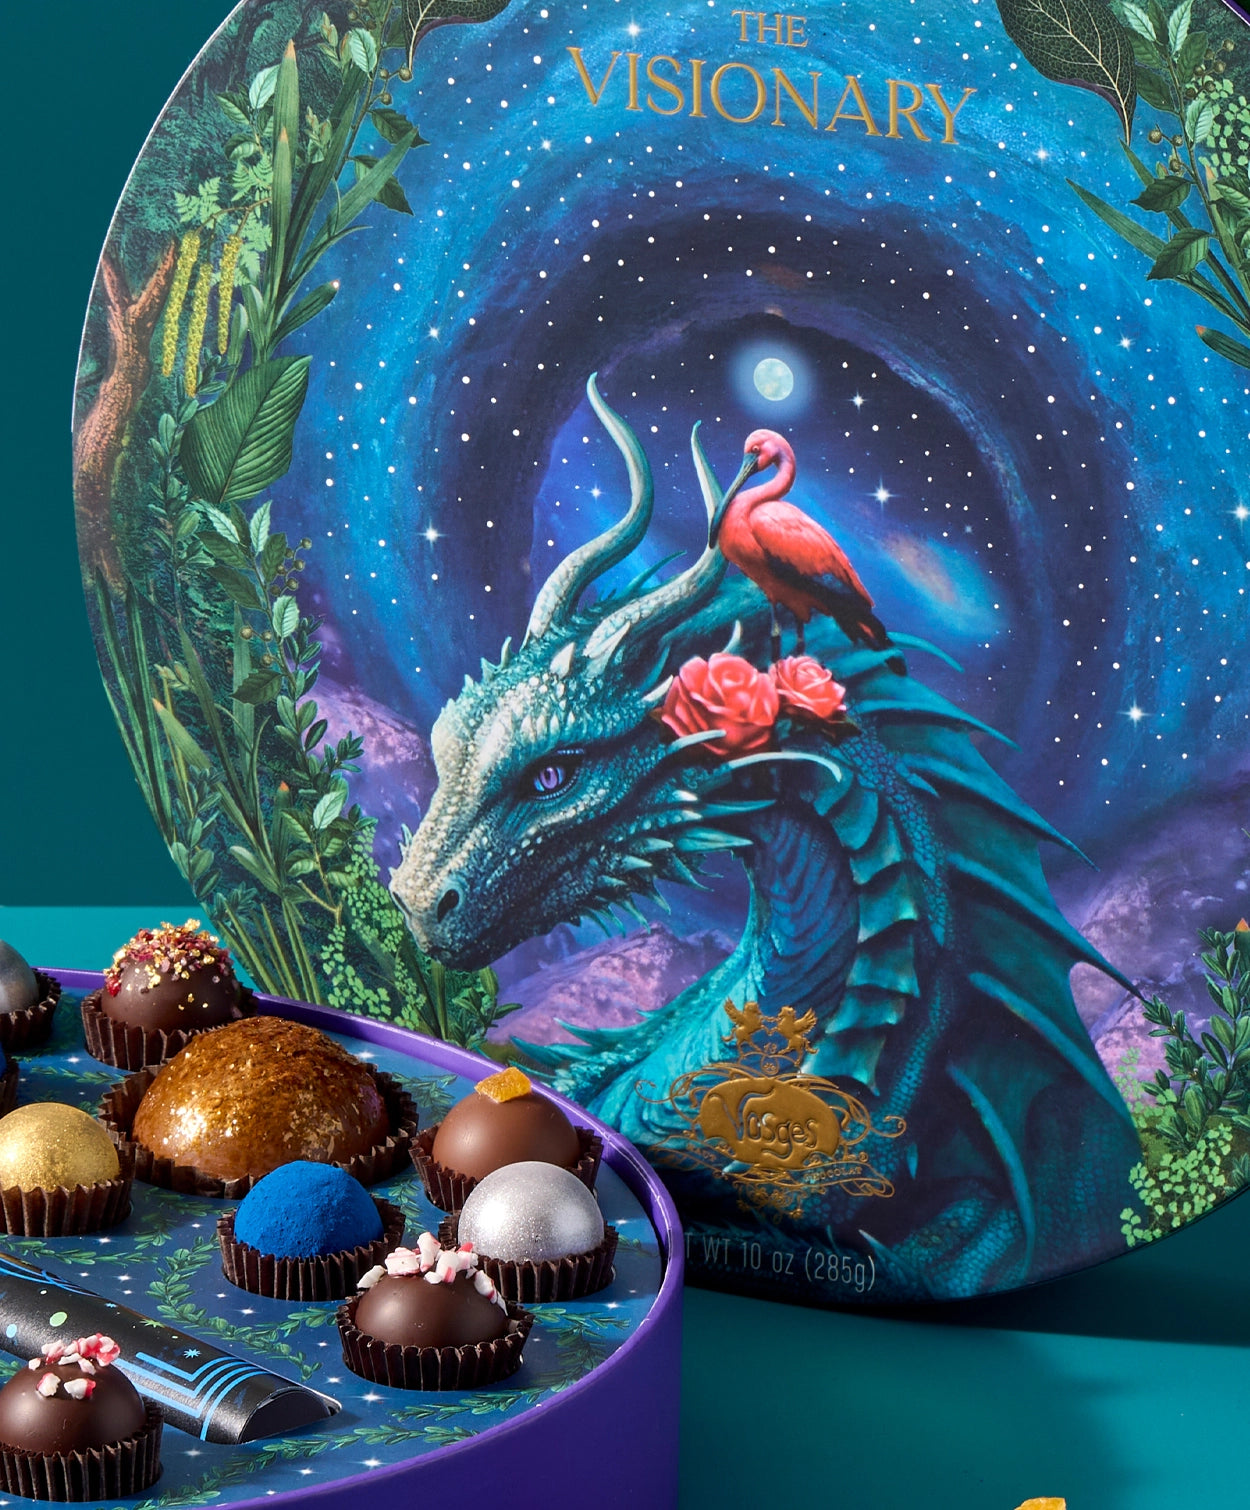 A closeup view of the Vosges Visionary collection artwork, ,a large blue dragon and pink egret sitting in a lush leafy forest infront a swirling night sky full of stars.